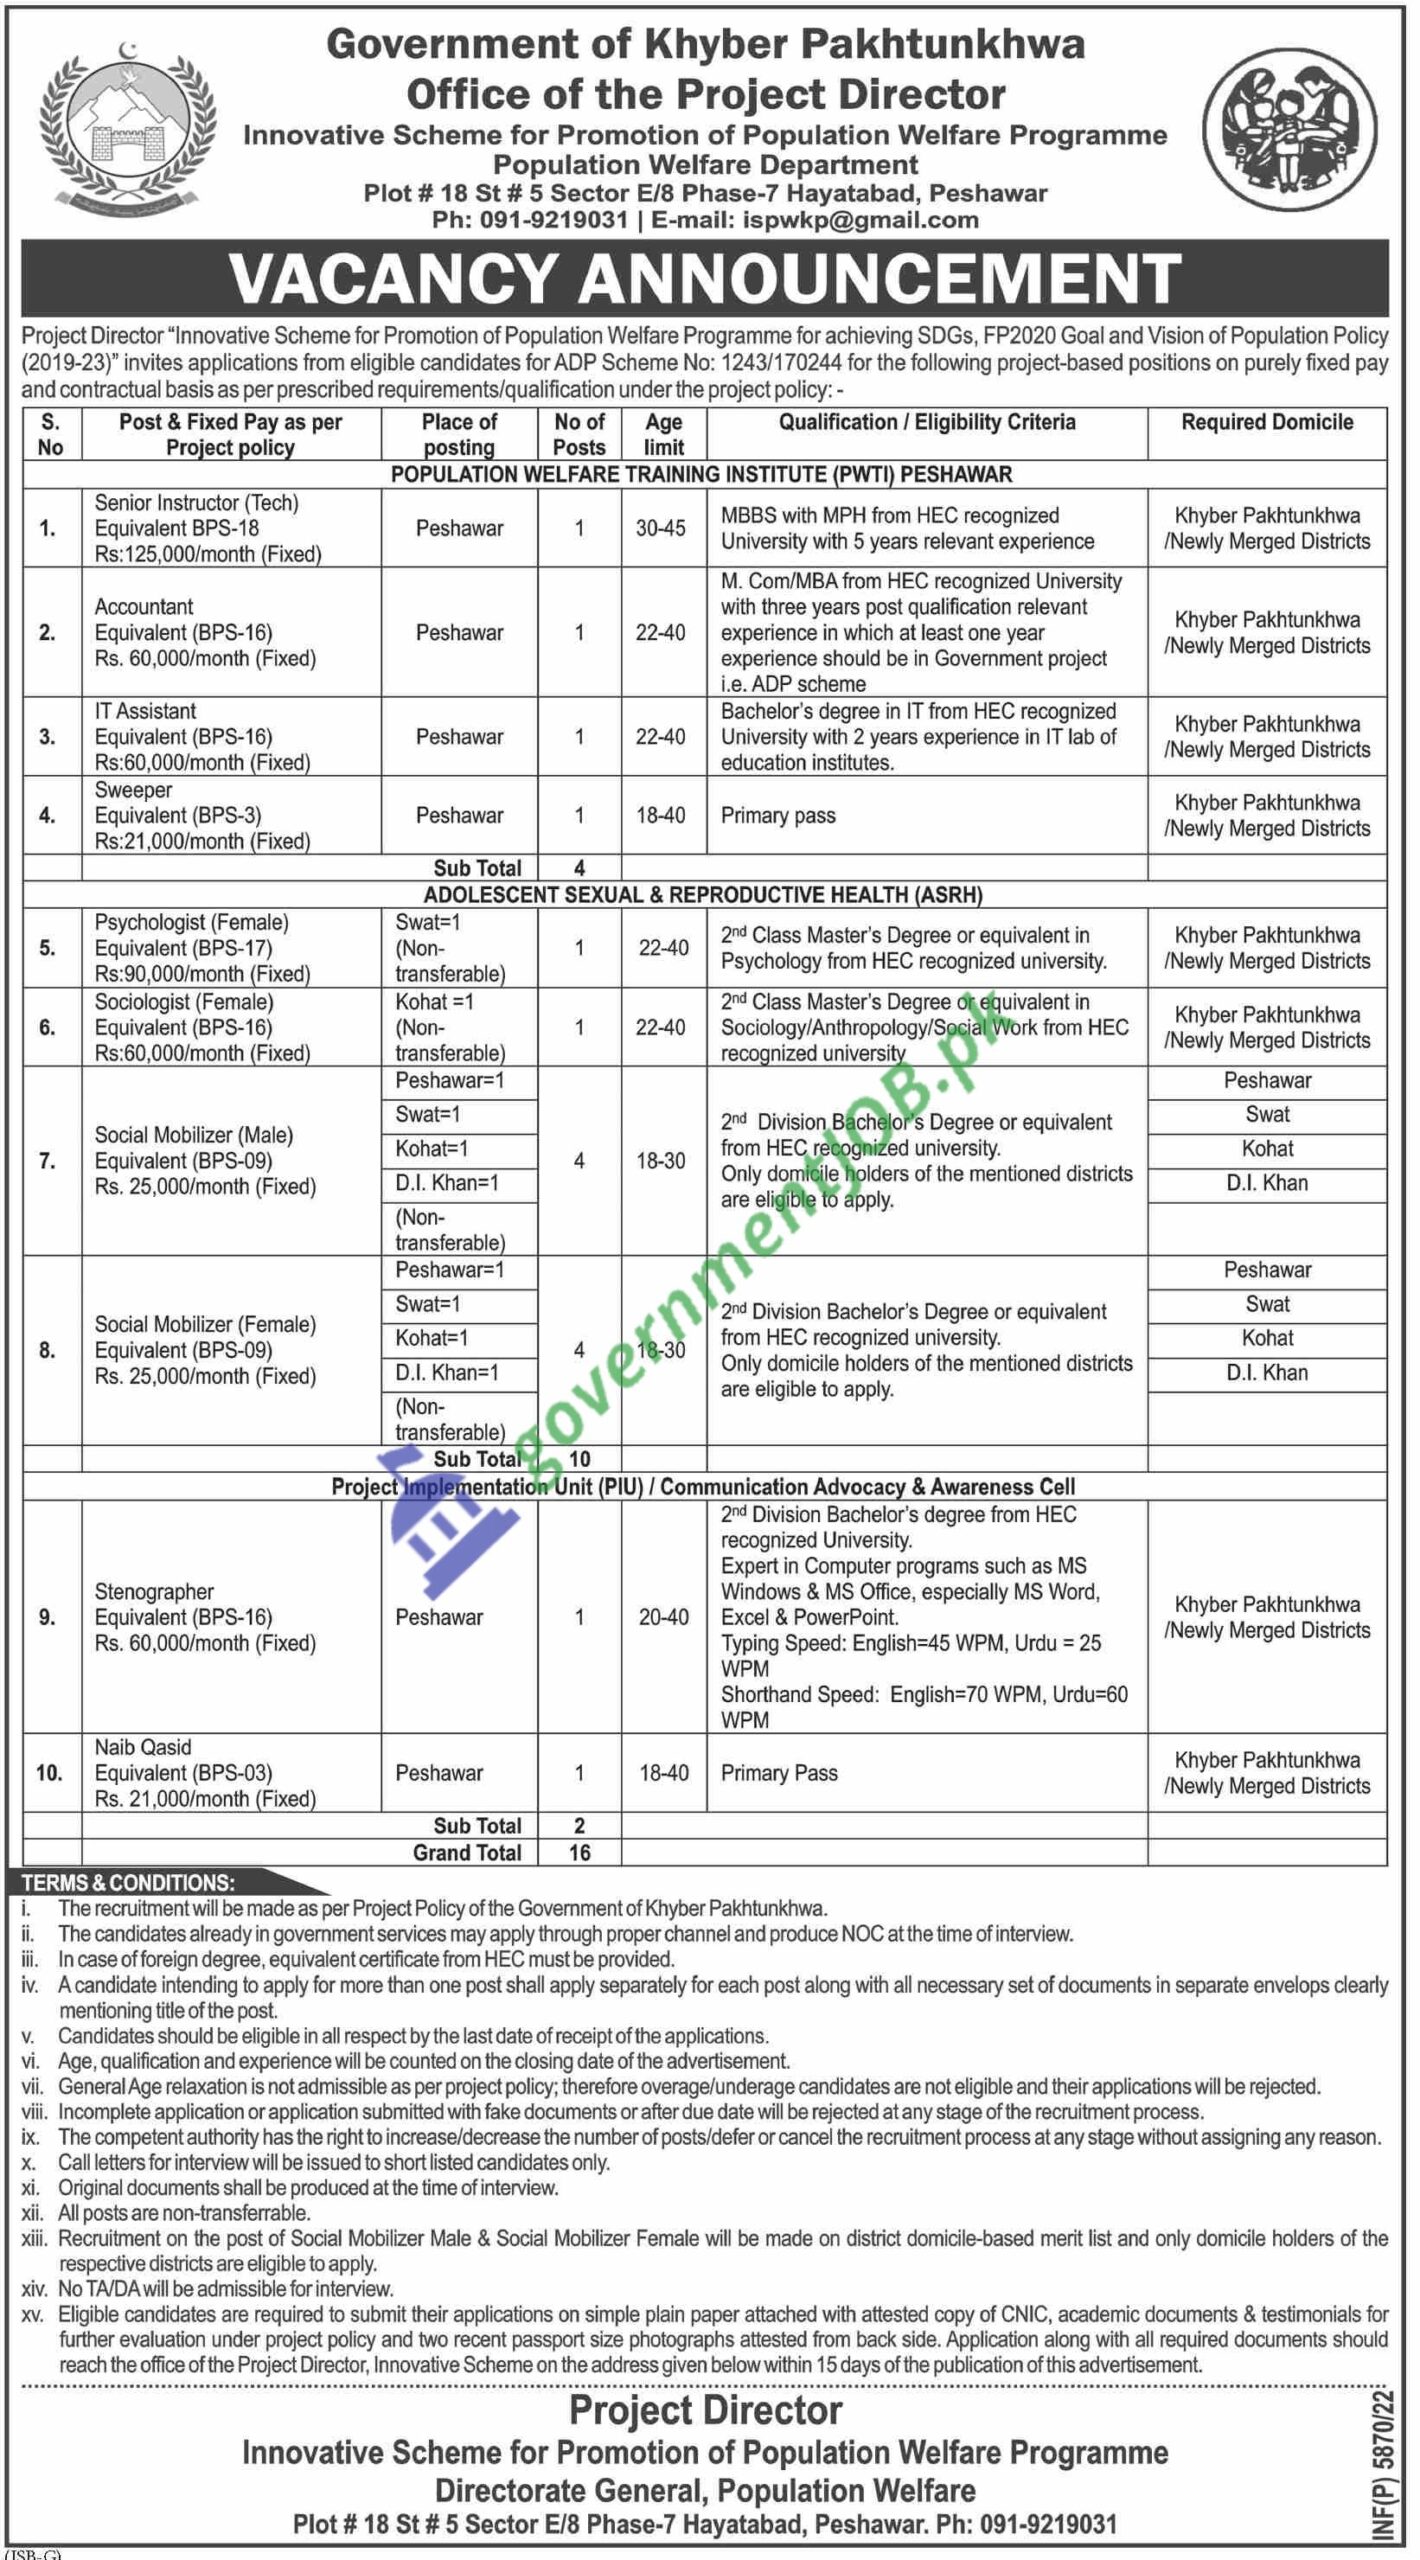 Govt of KPK Office of the Project Director Jobs 2022